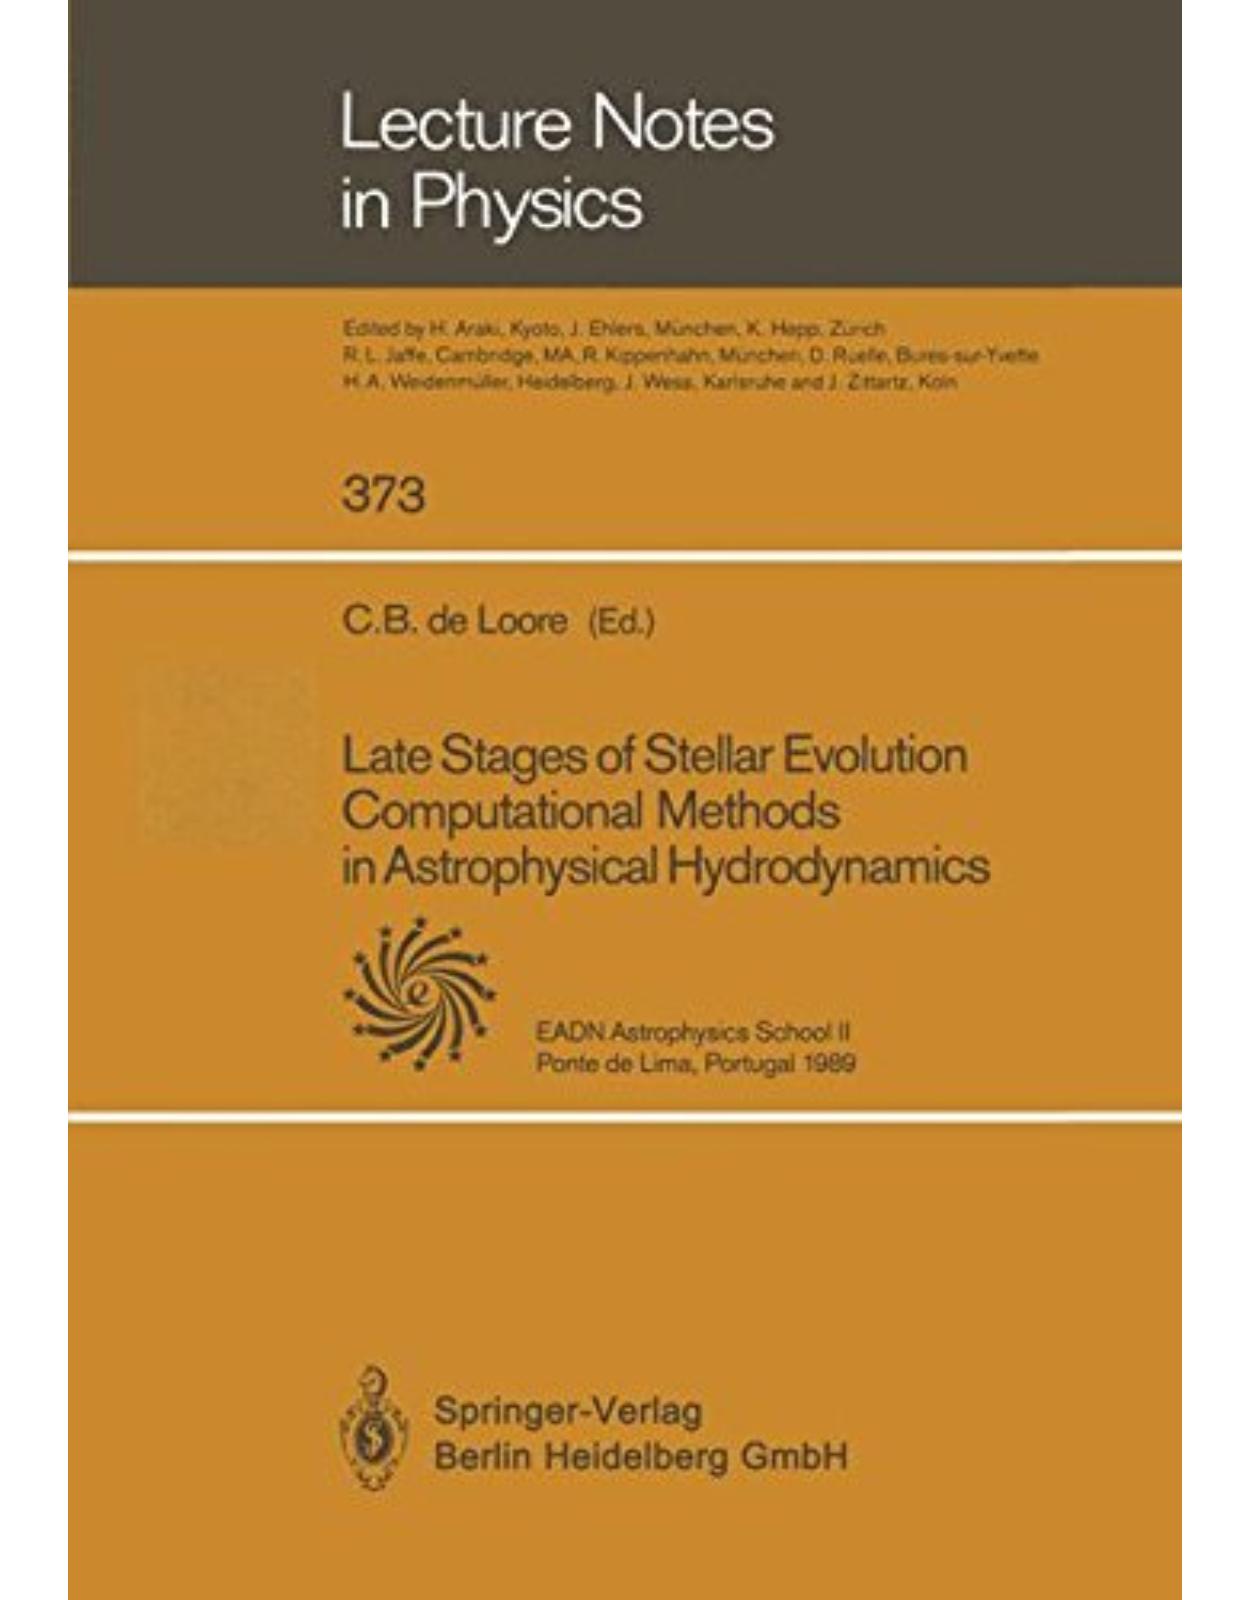 Late Stages of Stellar Evolution Computational Methods in Astrophysical Hydrodynamics